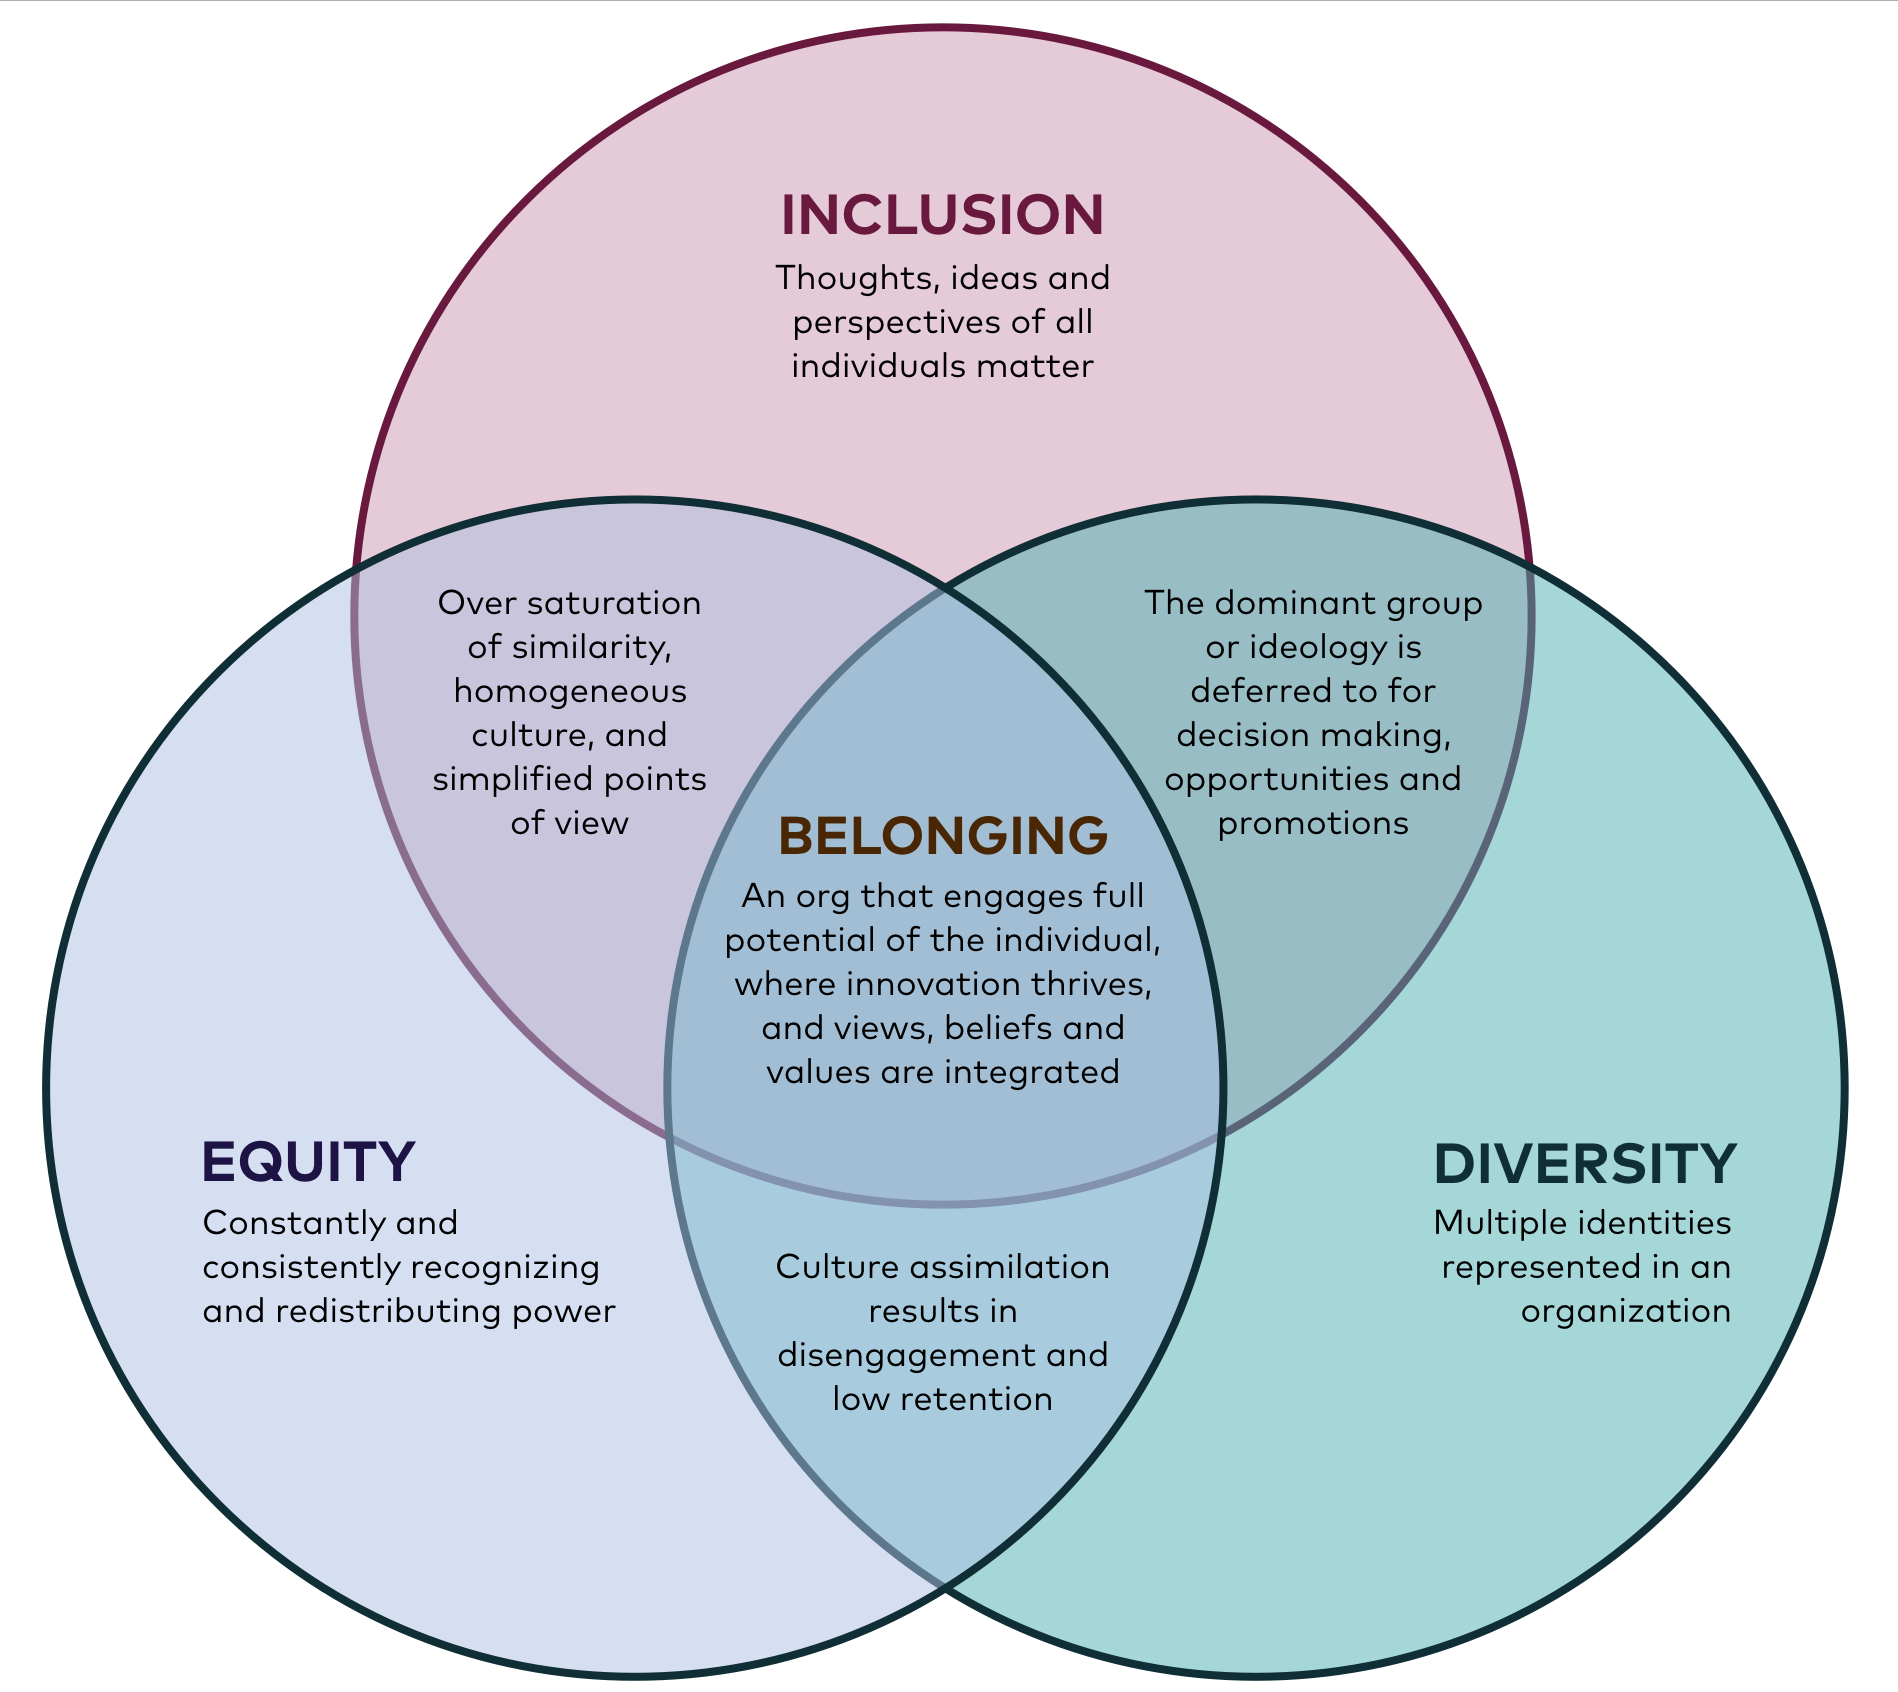 A venn diagram recreated illustrating the intersections and differences of inclusion, diversity, equity and belonging.